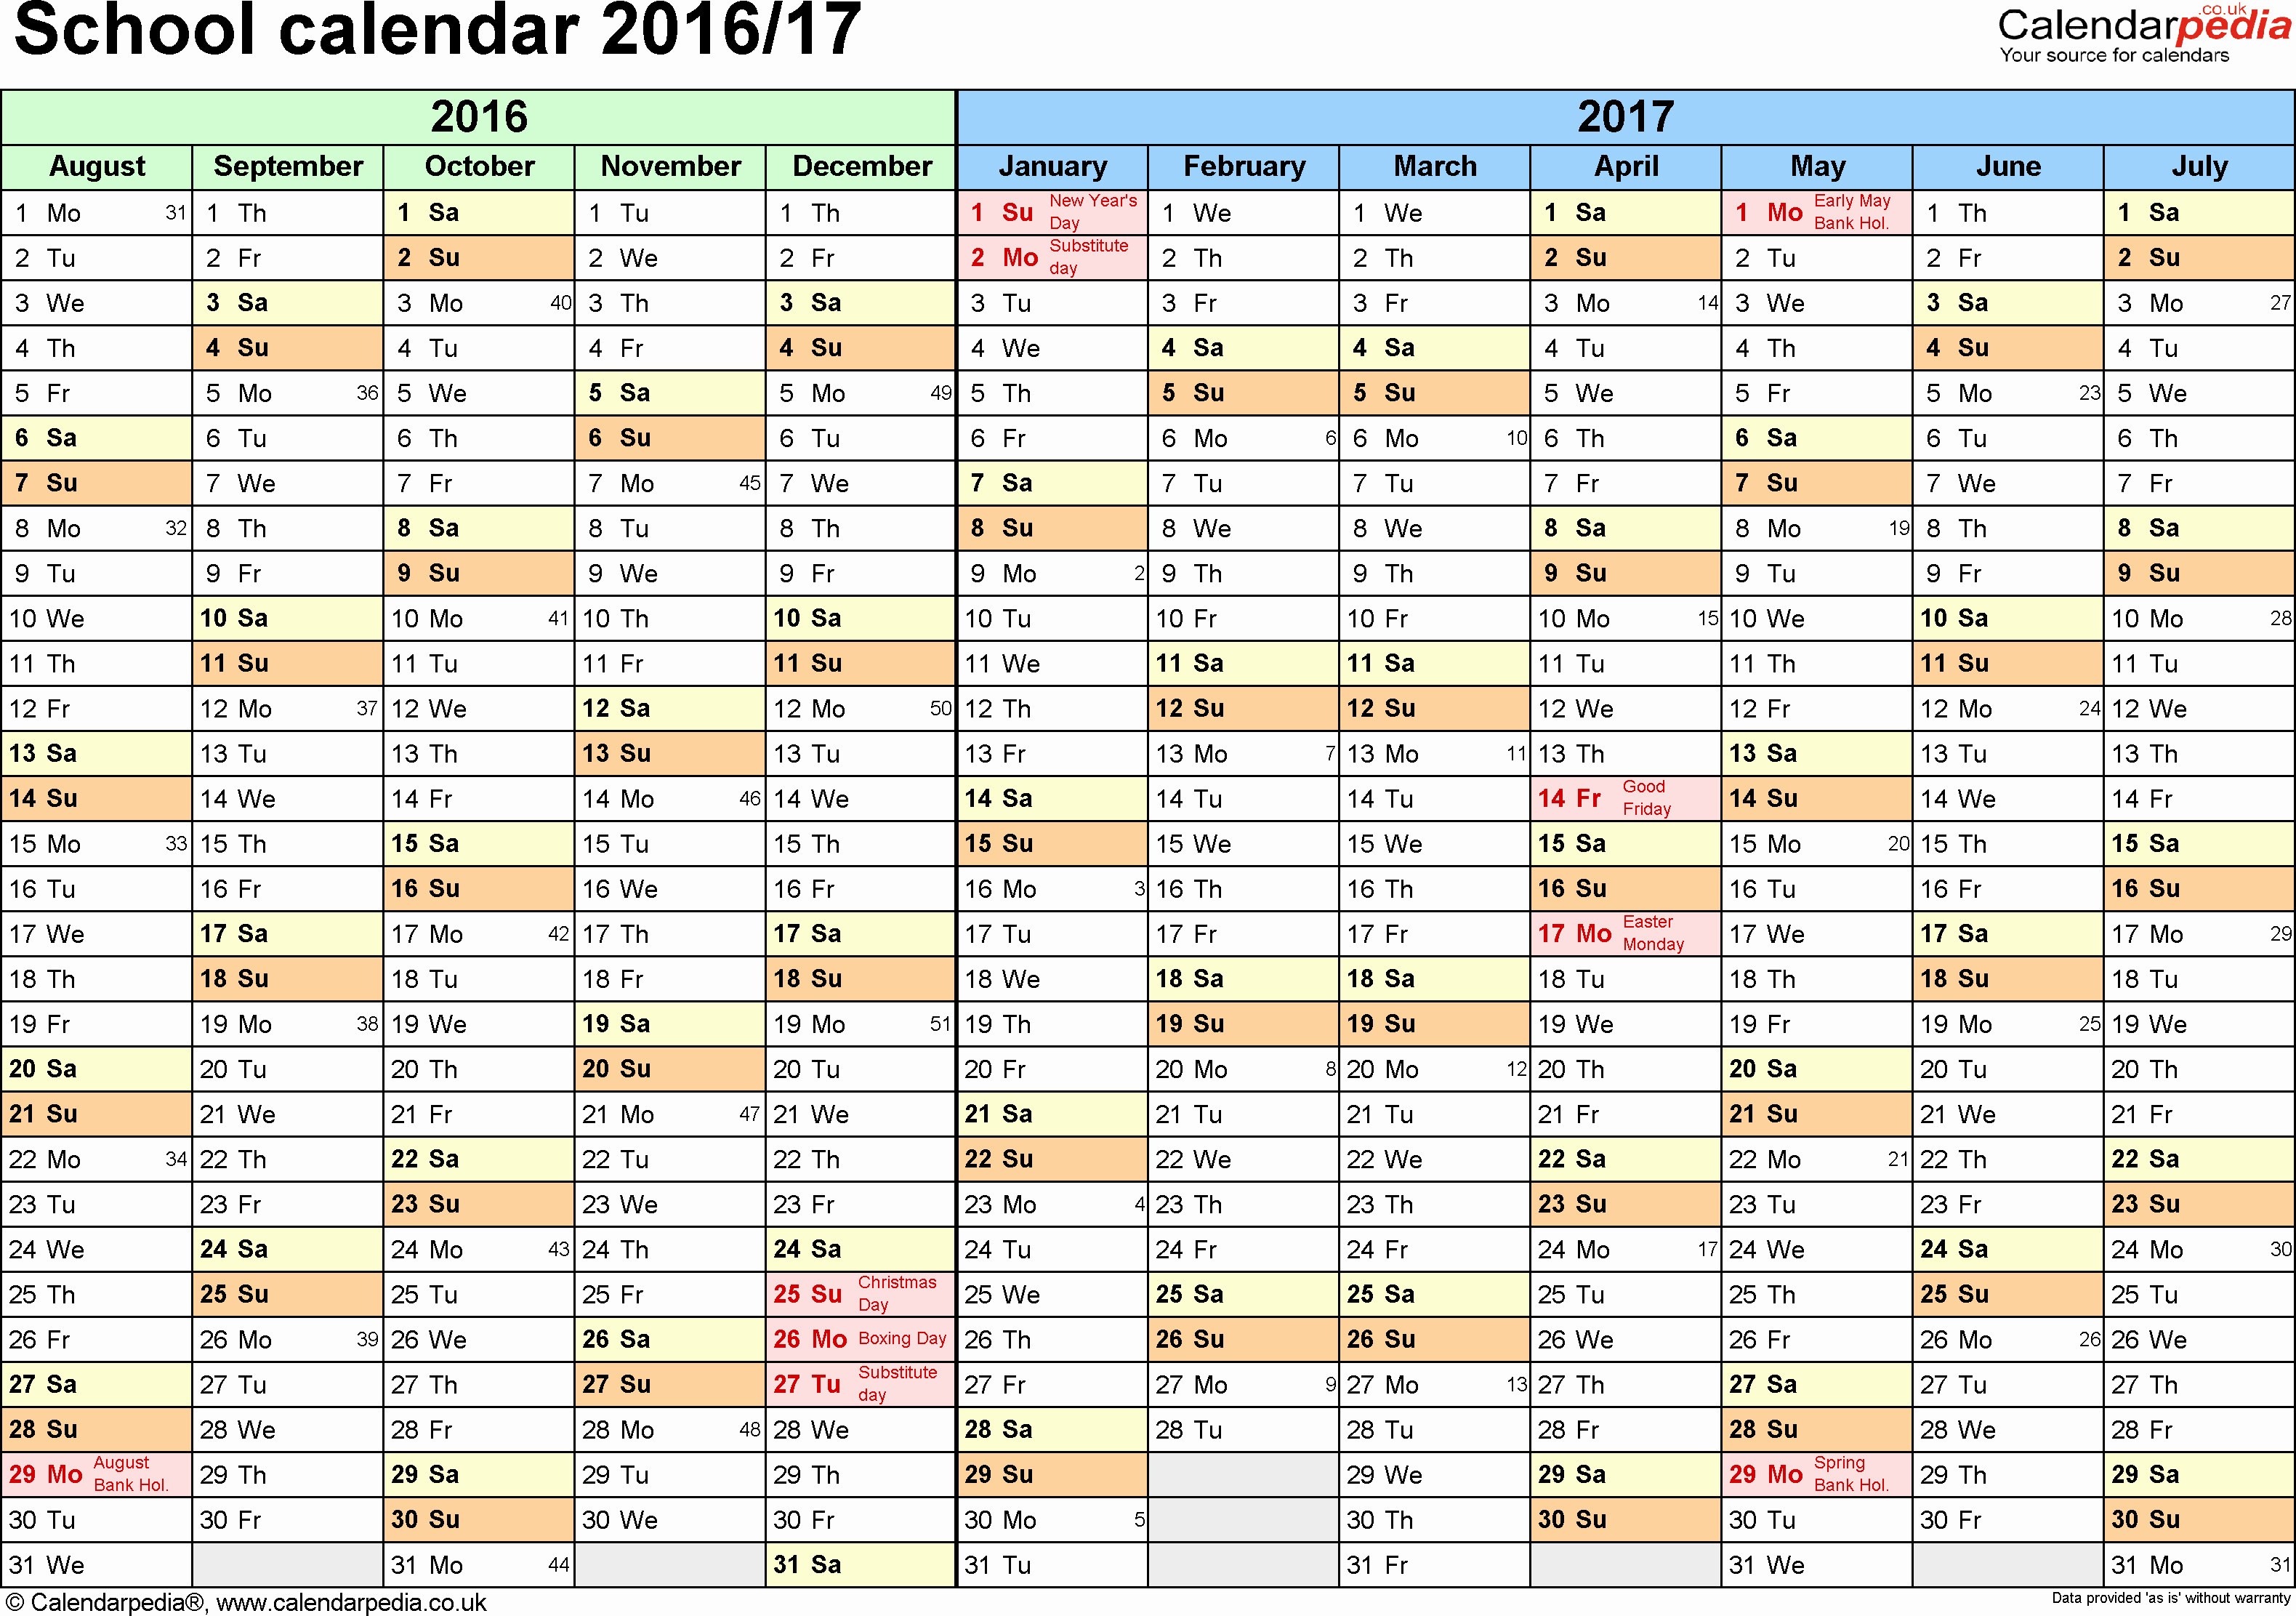 Excel Calendar 2017 with Holidays Inspirational School Calendars 2016 2017 as Free Printable Excel Templates